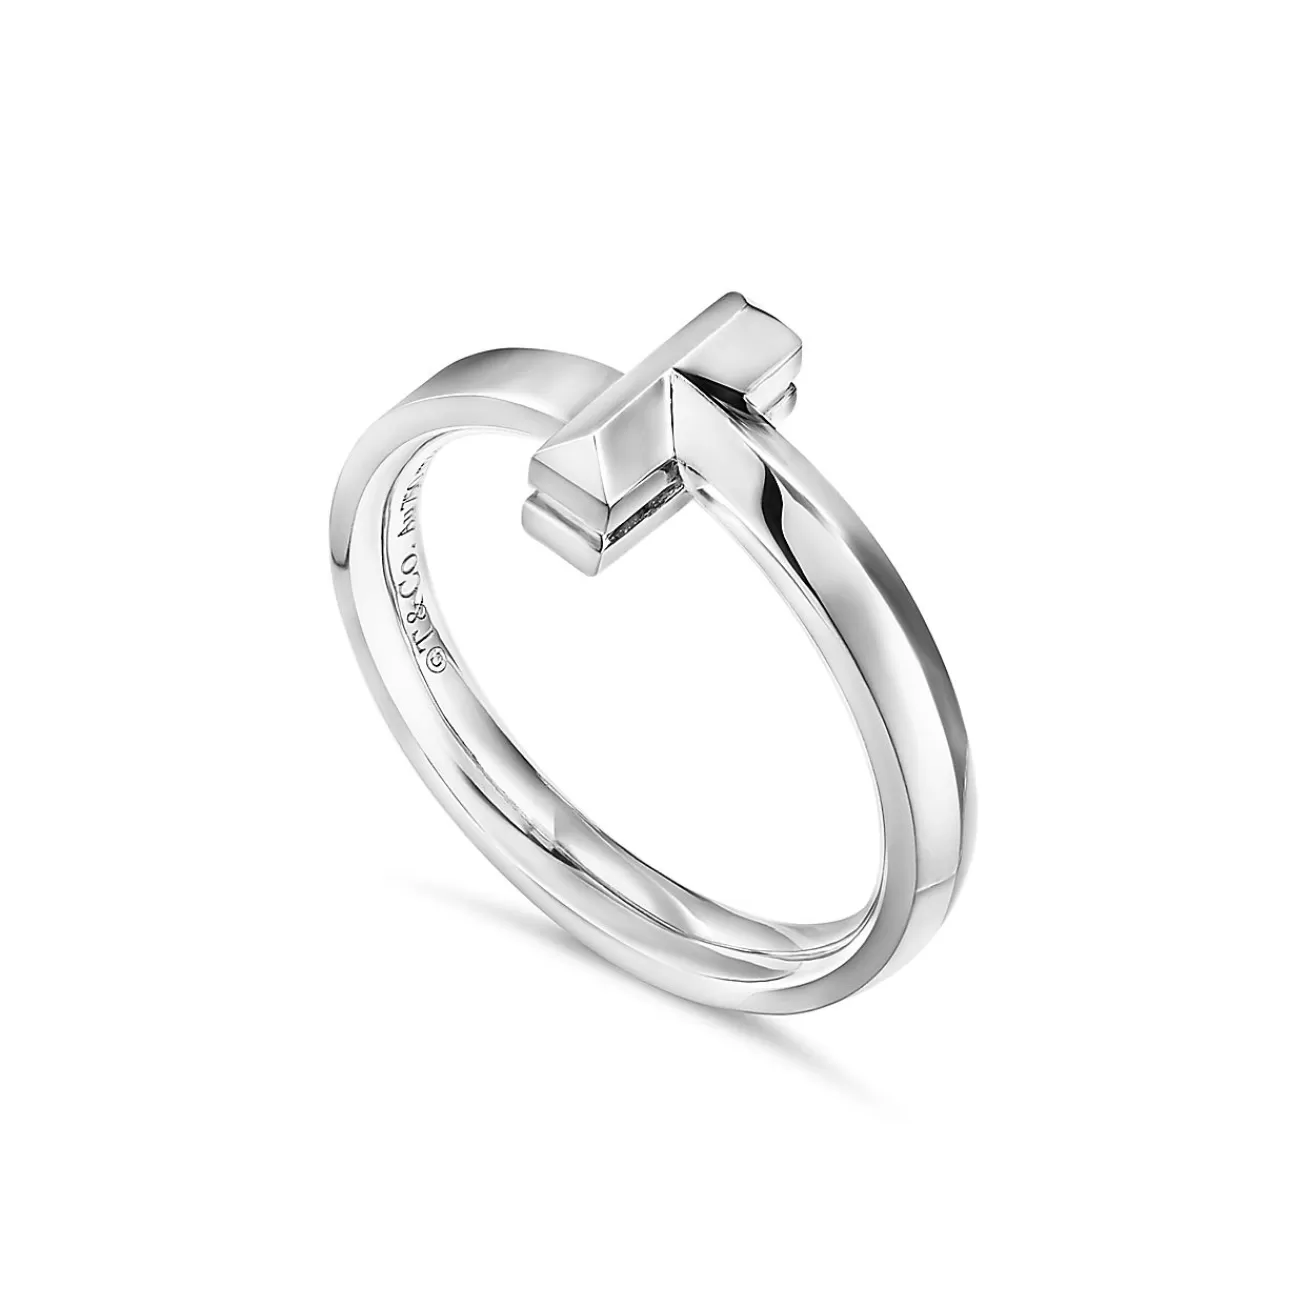 Tiffany & Co. Tiffany T T1 Ring in White Gold, 2.5 mm Wide | ^ Rings | Men's Jewelry